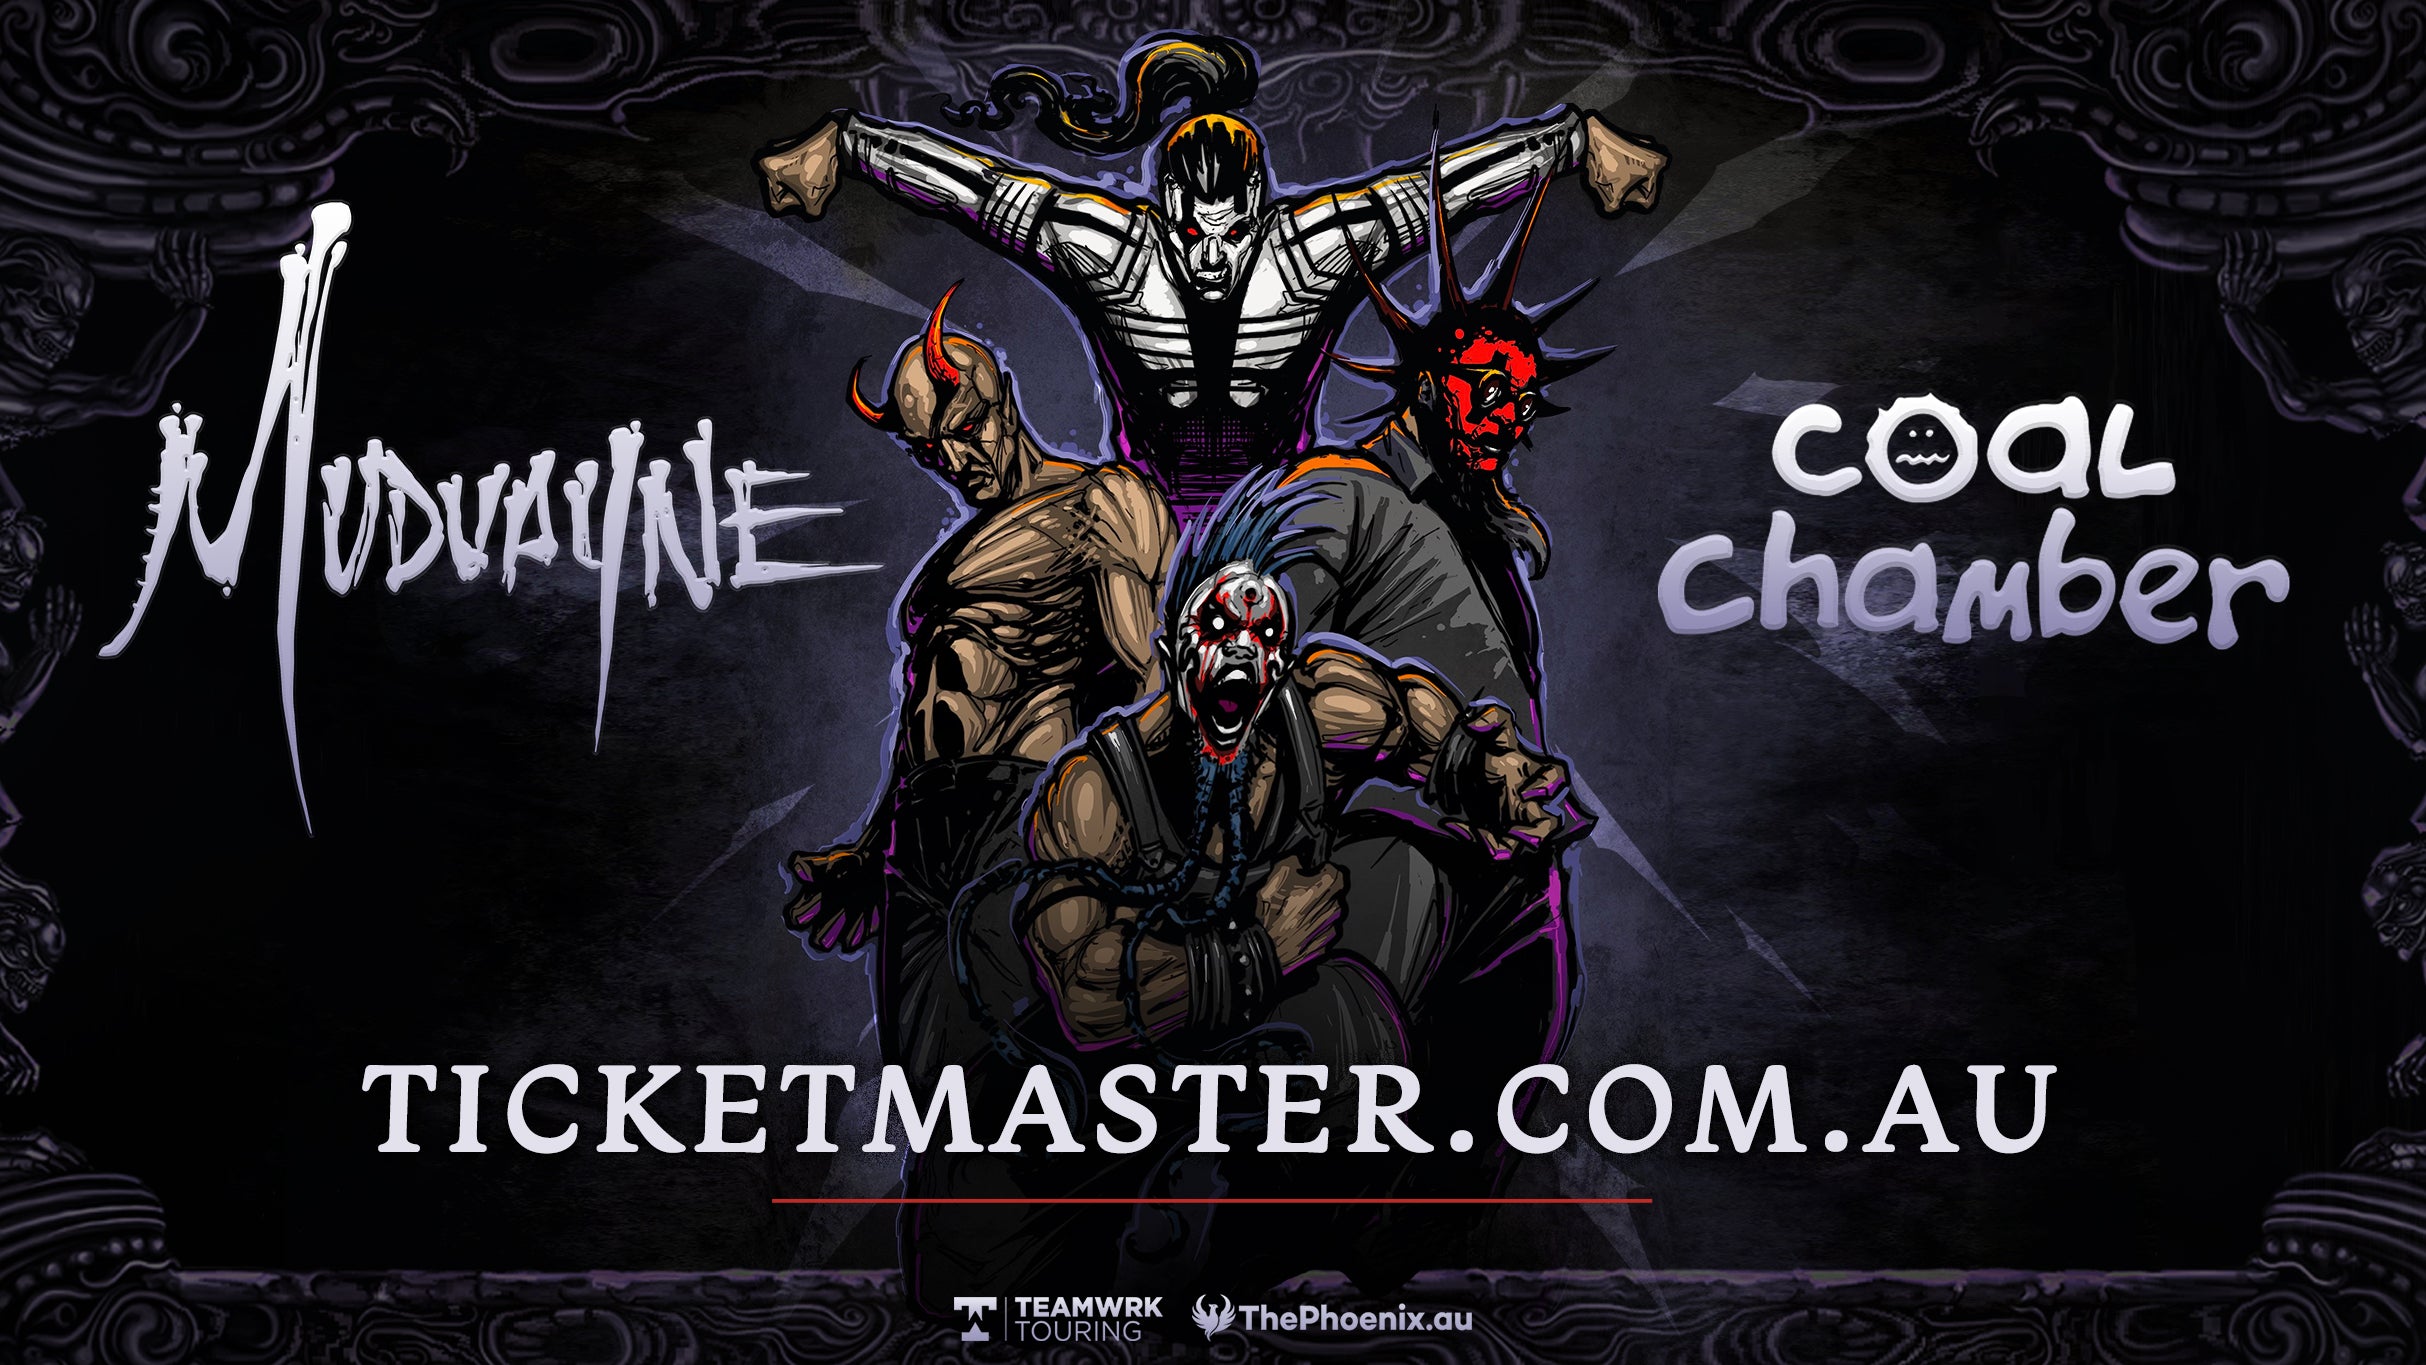 Image used with permission from Ticketmaster | Mudvayne + Coal Chamber tickets